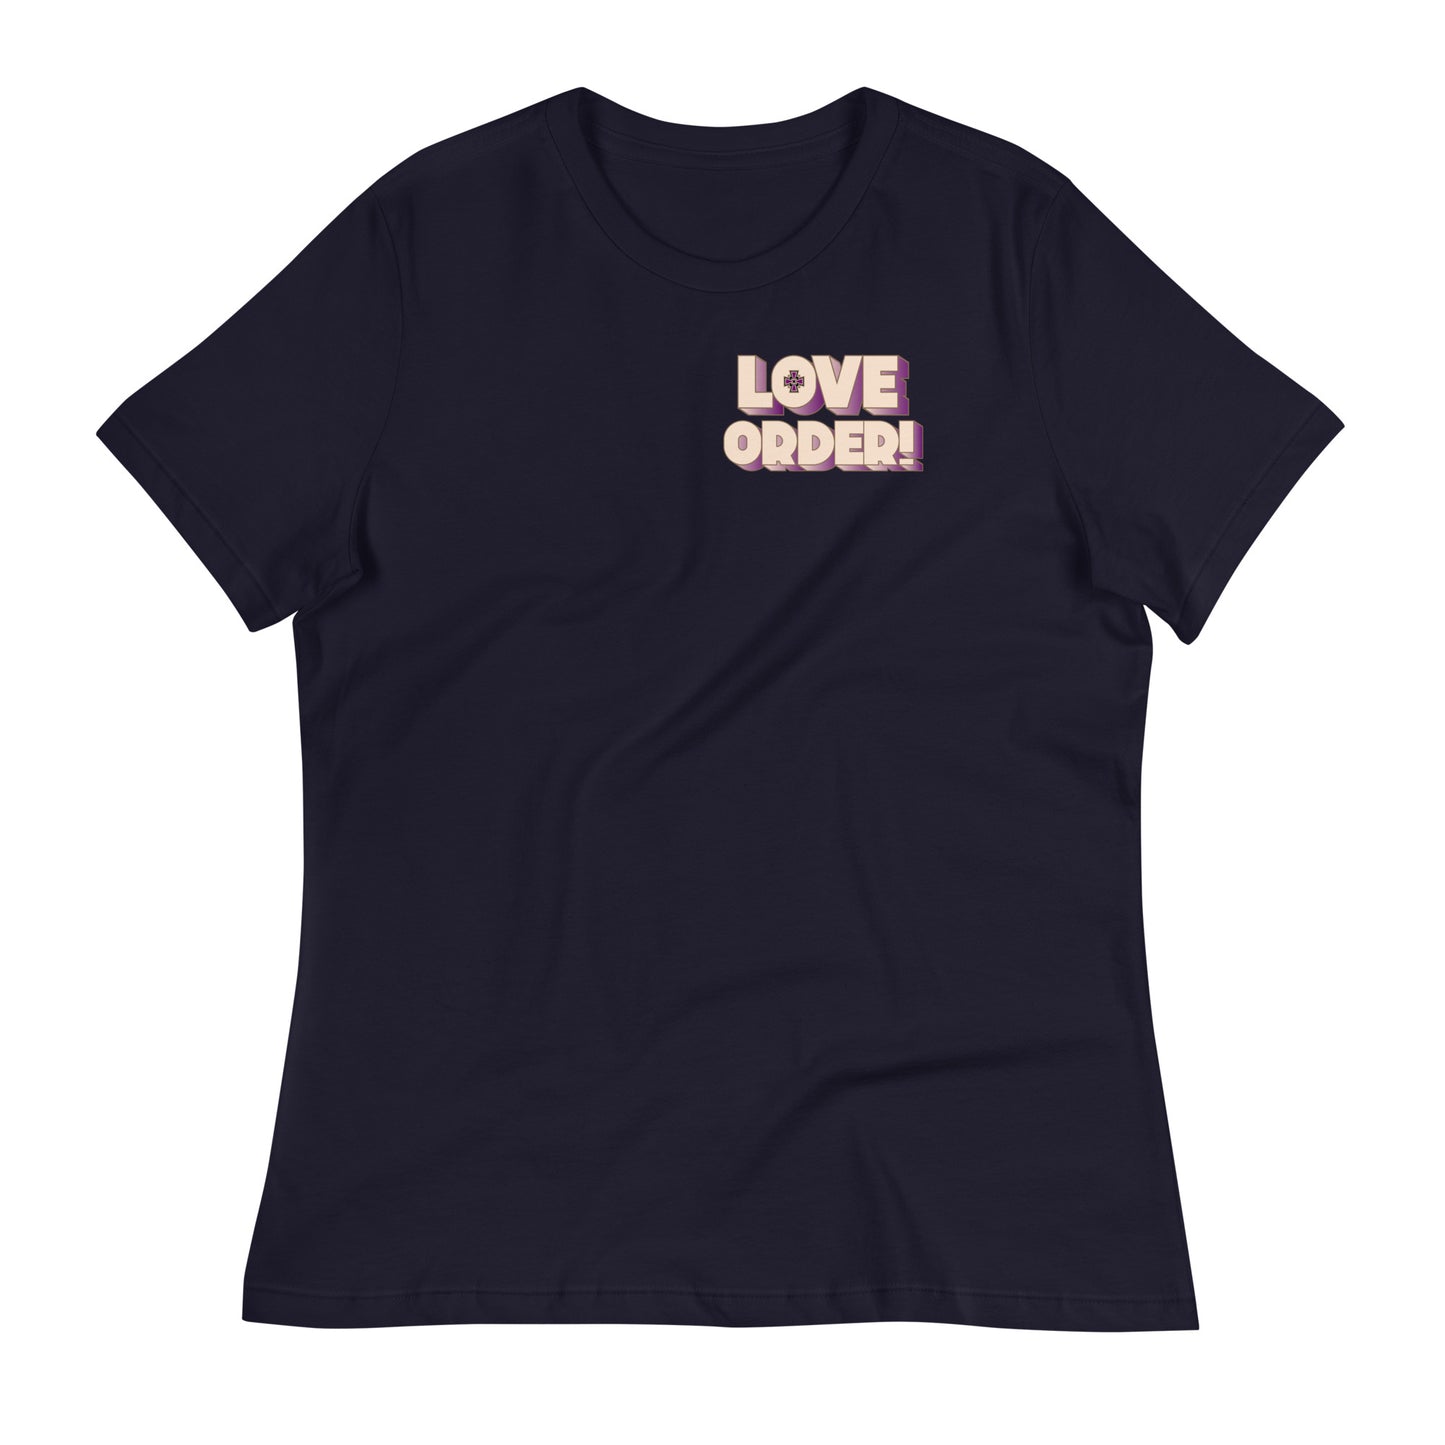 Love Order Collection Relaxed Short Sleeve T-shirt women's cut/sizes